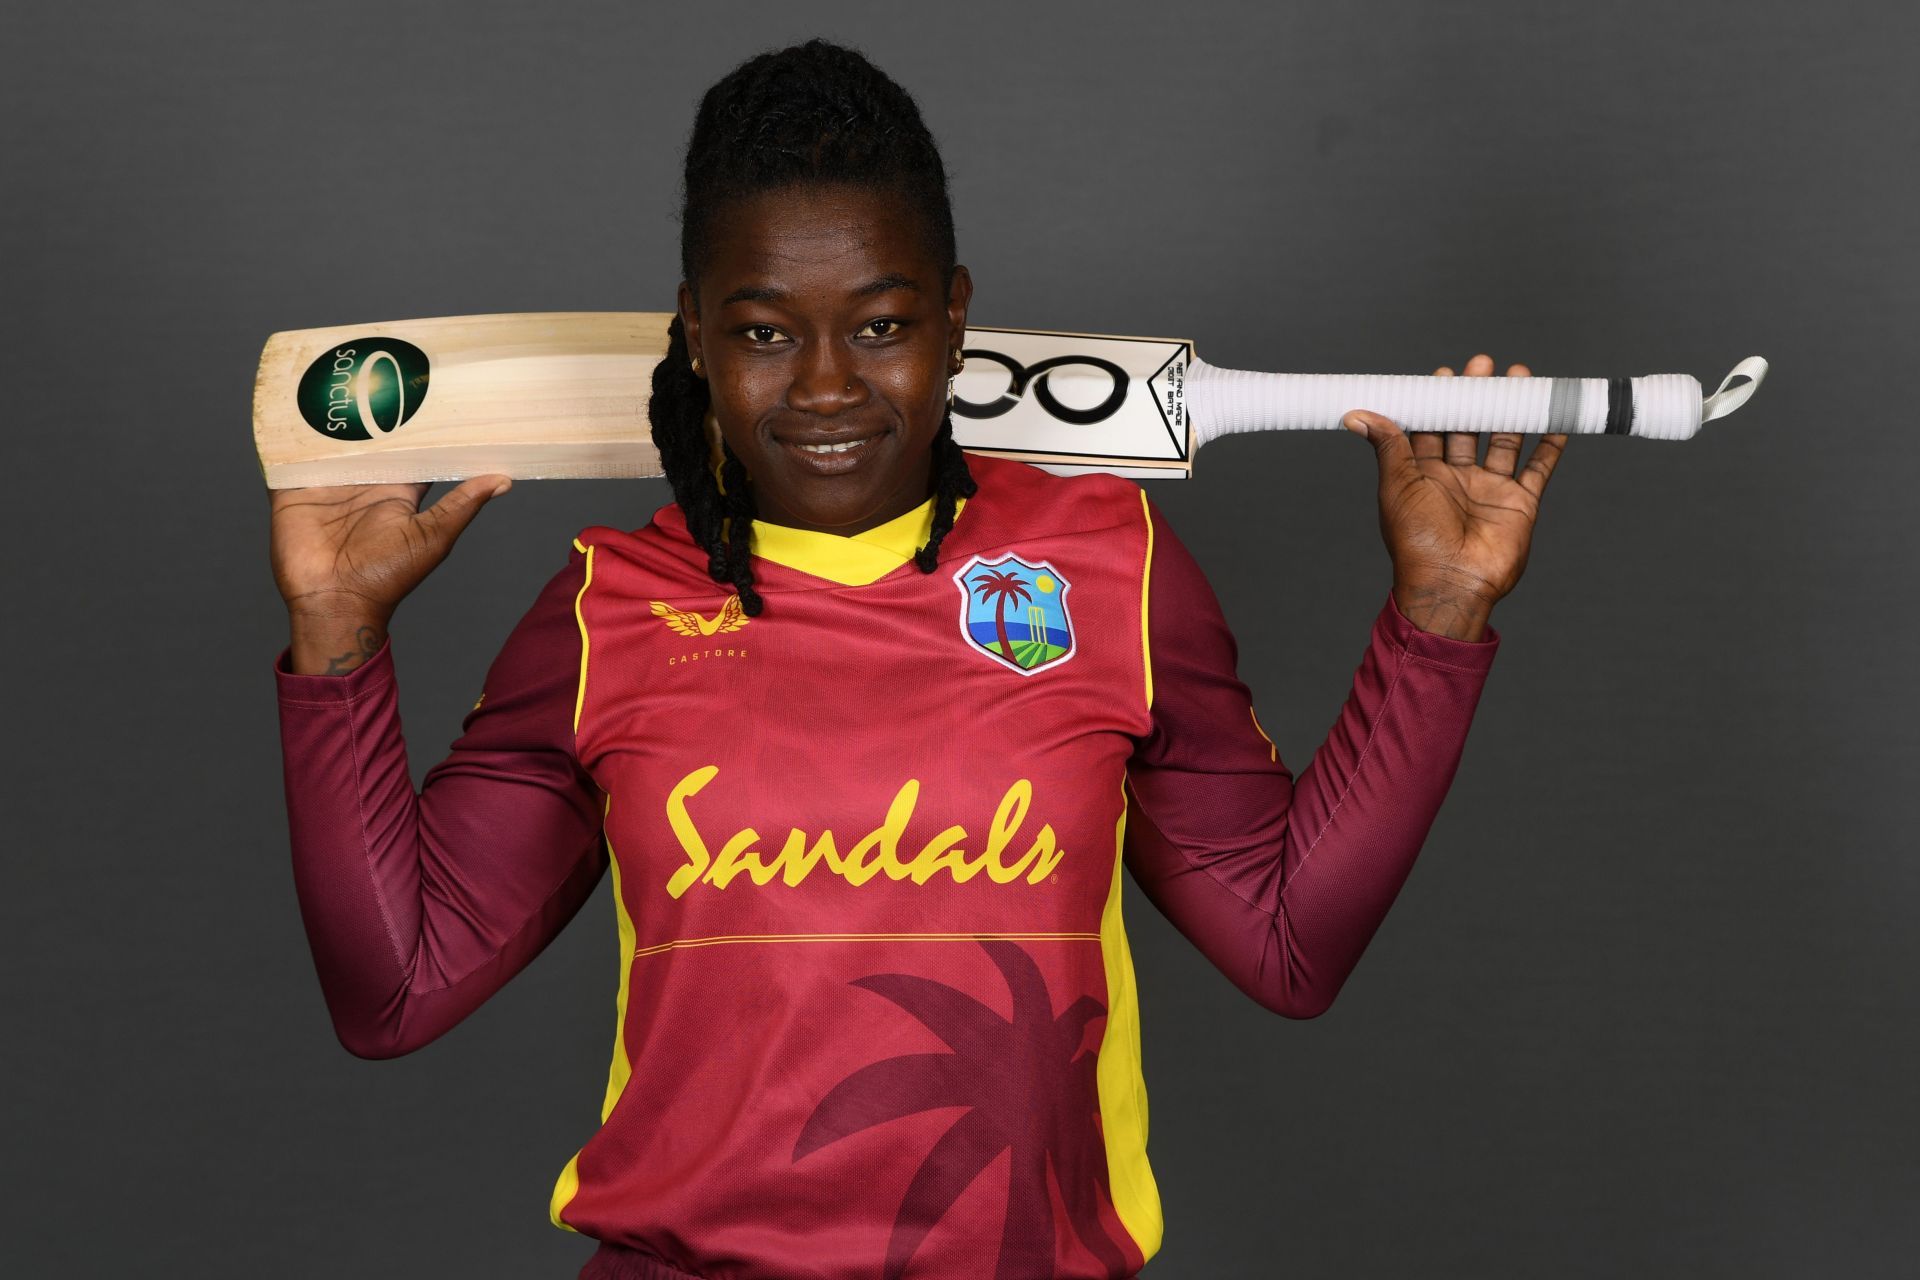 On her day, Deandra Dottin is perhaps one of the most dangerous all-rounders in the game.